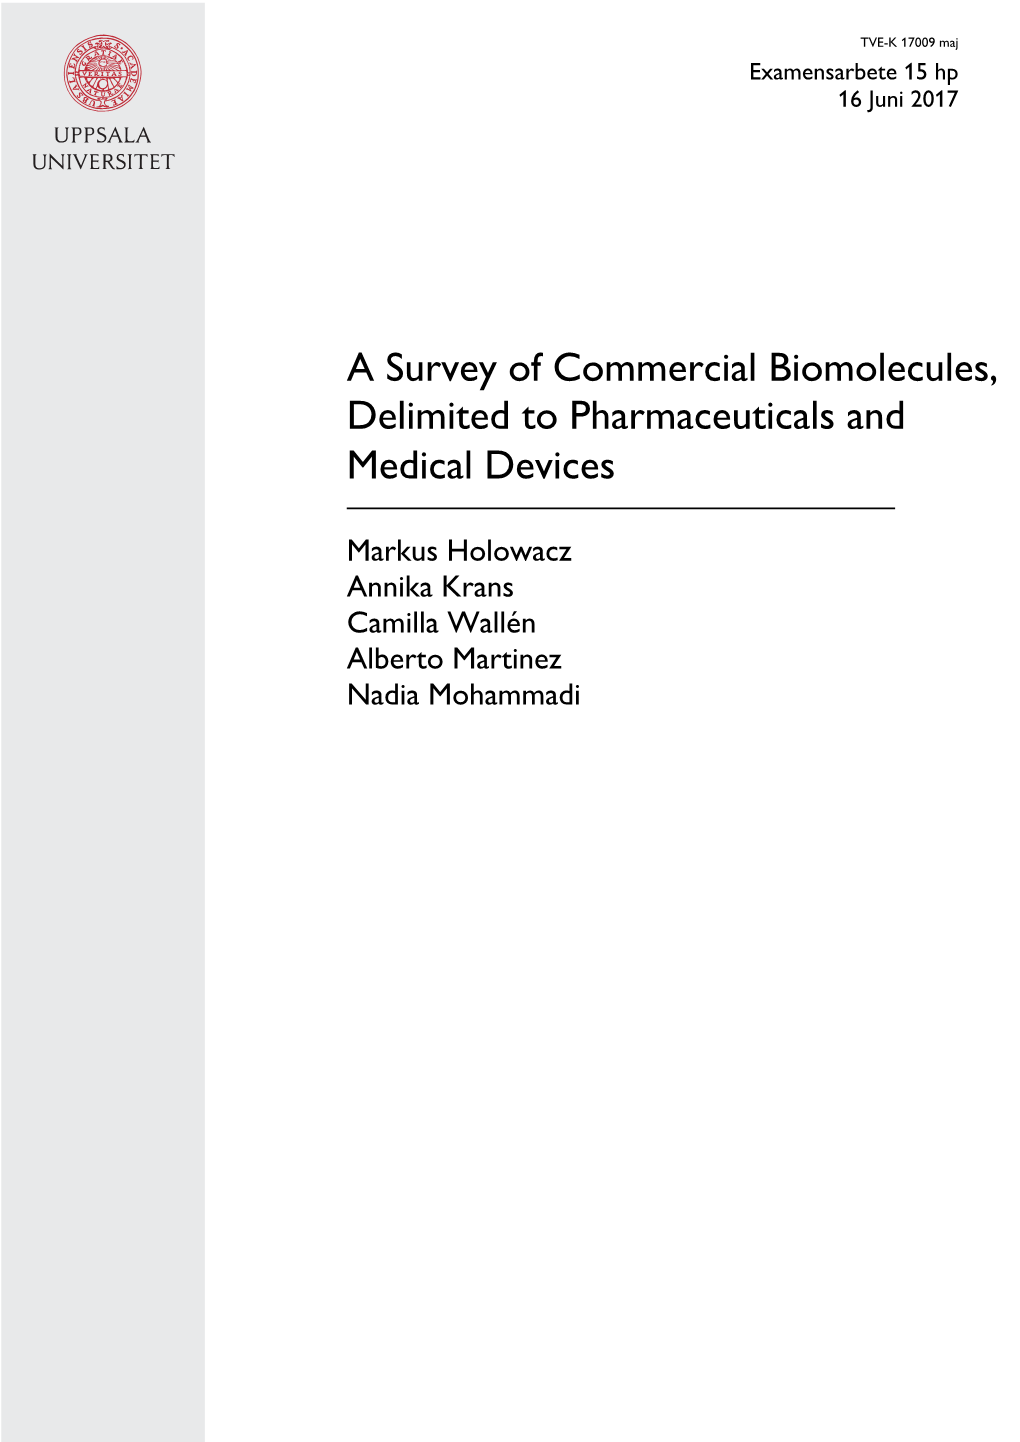 A Survey of Commercial Biomolecules, Delimited to Pharmaceuticals and Medical Devices